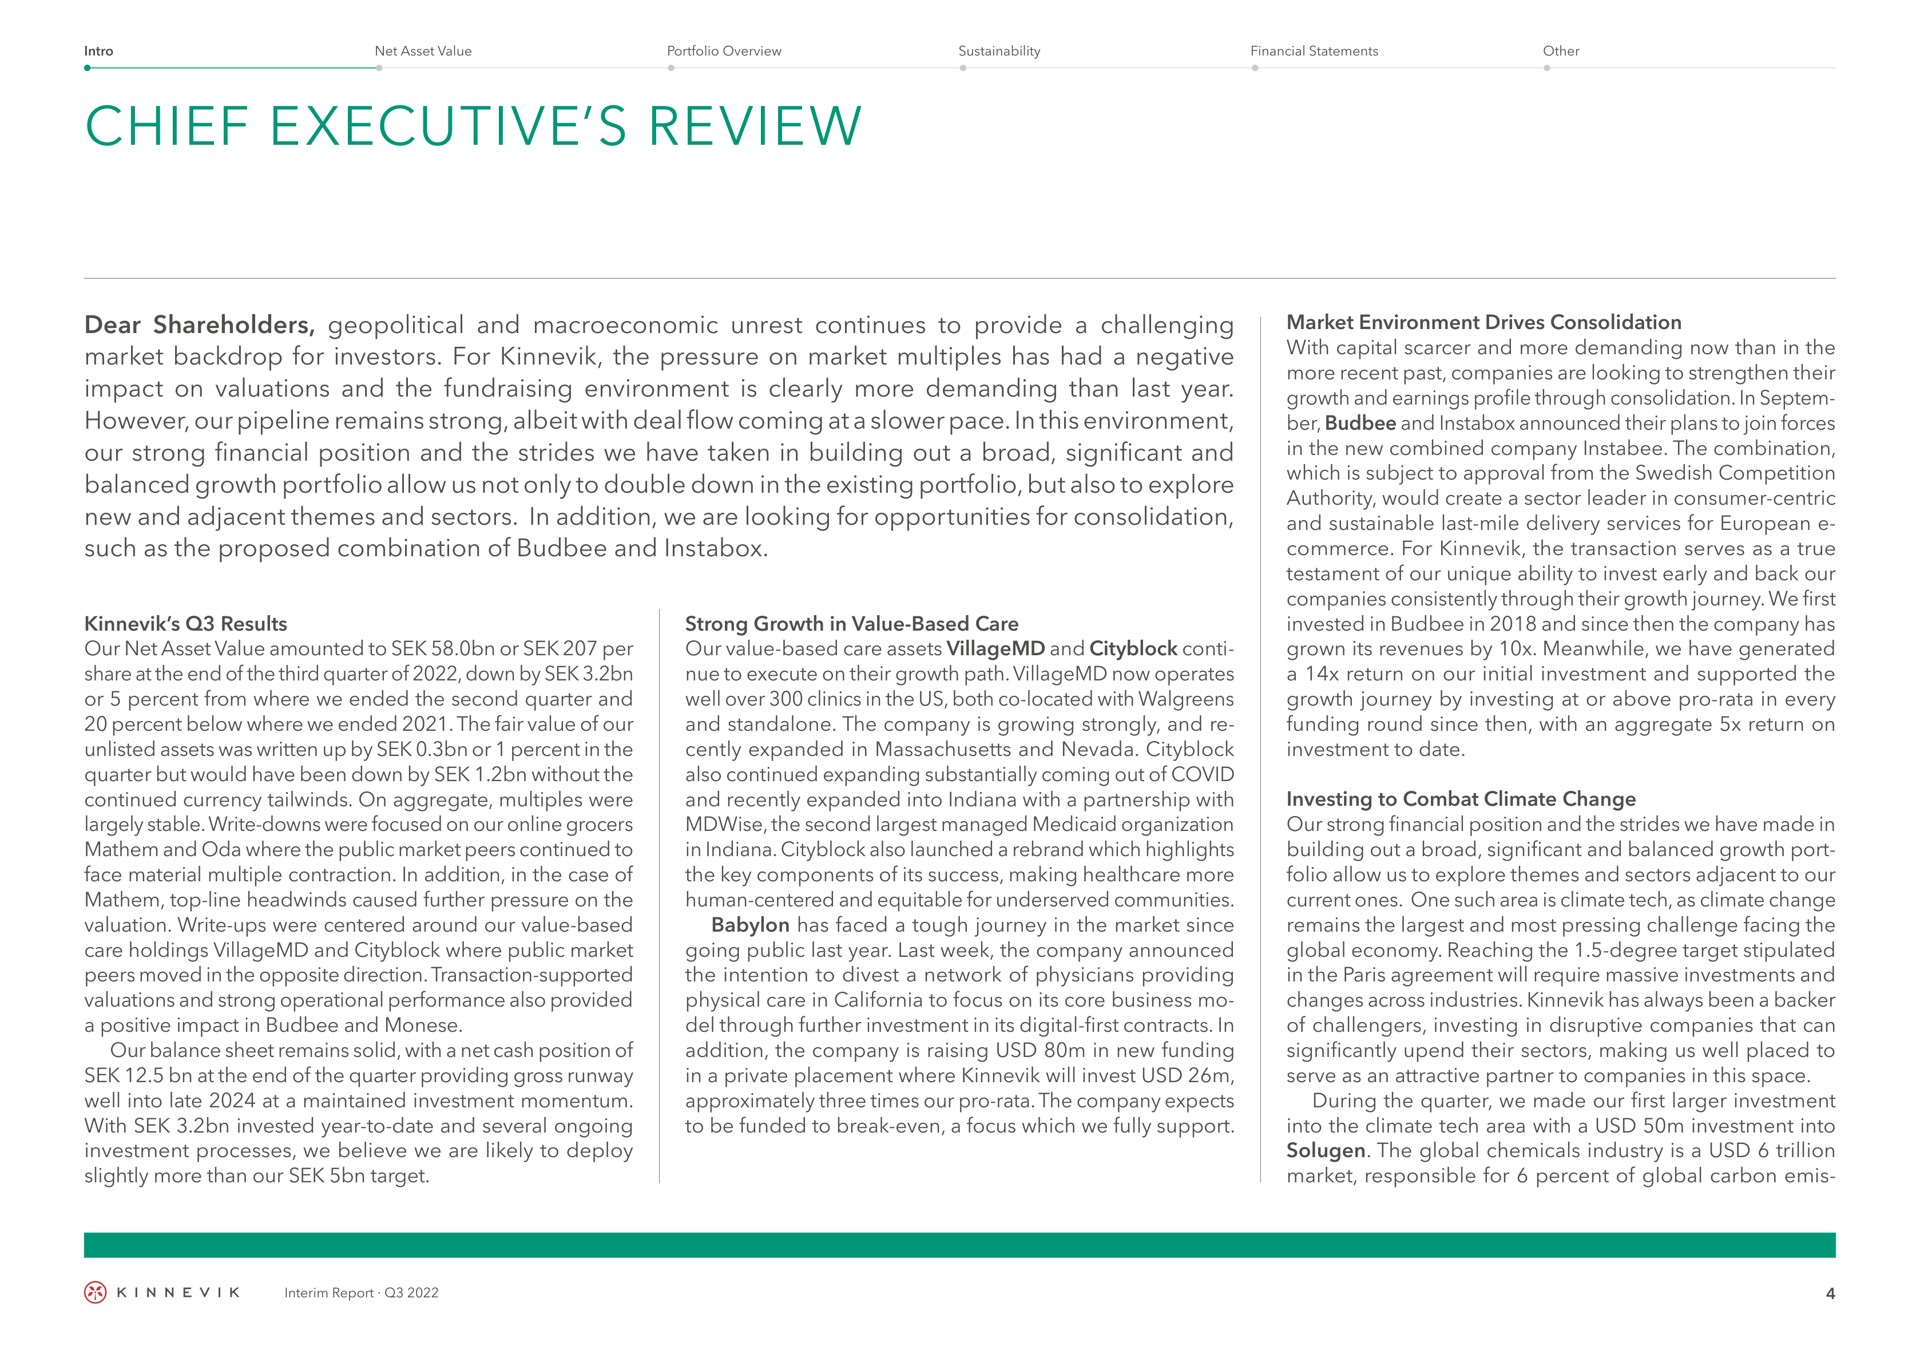 chief executive review dear shareholders geopolitical and unrest continues to provide a challenging market backdrop for investors for the pressure on market multiples has had a negative impact on valuations and the environment is clearly more demanding than last year however our pipeline remains strong albeit with deal flow coming at a pace in this environment our strong financial position and the strides we have taken in building out a broad significant and balanced growth portfolio allow us not only to double down in the existing portfolio but also to explore new and adjacent themes and sectors in addition we are looking for opportunities for consolidation such as the proposed combination of and results our net asset value amounted to or per share at the end of the third quarter of down by or percent from where we ended the second quarter and percent below where we ended the fair value of our unlisted assets was written up by or percent in the quarter but would have been down by without the continued currency on aggregate multiples were largely stable write downs were focused on our grocers and oda where the public market peers continued to face material multiple contraction in addition in the case of top line caused further pressure on the valuation write ups were centered around our value based care holdings and where public market peers moved in the opposite direction transaction supported valuations and strong operational performance also provided a positive impact in and our balance sheet remains solid with a net cash position of at the end of the quarter providing gross runway well into late at a maintained investment momentum with invested year to date and several ongoing investment processes we believe we are likely to deploy slightly more than our target strong growth in value based care our value based care assets and to execute on their growth path now operates well over clinics in the us both located with and the company is growing strongly and expanded in and also continued expanding substantially coming out of covid and recently expanded into with a partnership with the second managed organization in also launched a rebrand which highlights the key components of its success making more human centered and equitable for communities has faced a tough journey in the market since going public last year last week the company announced the intention to divest a network of physicians providing physical care in to focus on its core business through further investment in its digital first contracts in addition the company is raising in new funding in a private placement where will invest approximately three times our pro rata the company expects to be funded to break even a focus which we fully support market environment drives consolidation with capital and more demanding now than in the more recent past companies are looking to strengthen their growth and earnings profile through consolidation in ber and announced their plans to join forces in the new combined company the combination which is subject to approval from the competition authority would create a sector leader in consumer centric and sustainable last mile delivery services for commerce for the transaction serves as a true testament of our unique ability to invest early and back our companies consistently through their growth journey we first invested in in and since then the company has grown its revenues by meanwhile we have generated a return on our initial investment and supported the growth journey by investing at or above pro rata in every funding round since then with an aggregate return on investment to date investing to combat climate change our strong financial position and the strides we have made in building out a broad significant and balanced growth port folio allow us to explore themes and sectors adjacent to our current ones one such area is climate tech as climate change remains the and most pressing challenge facing the global economy reaching the degree target stipulated in the agreement will require massive investments and changes across industries has always been a backer of challengers investing in disruptive companies that can significantly upend their sectors making us well placed to serve as an attractive partner to companies in this space during the quarter we made our first investment into the climate tech area with a investment into the global chemicals industry is a trillion market responsible for percent of global carbon | Kinnevik